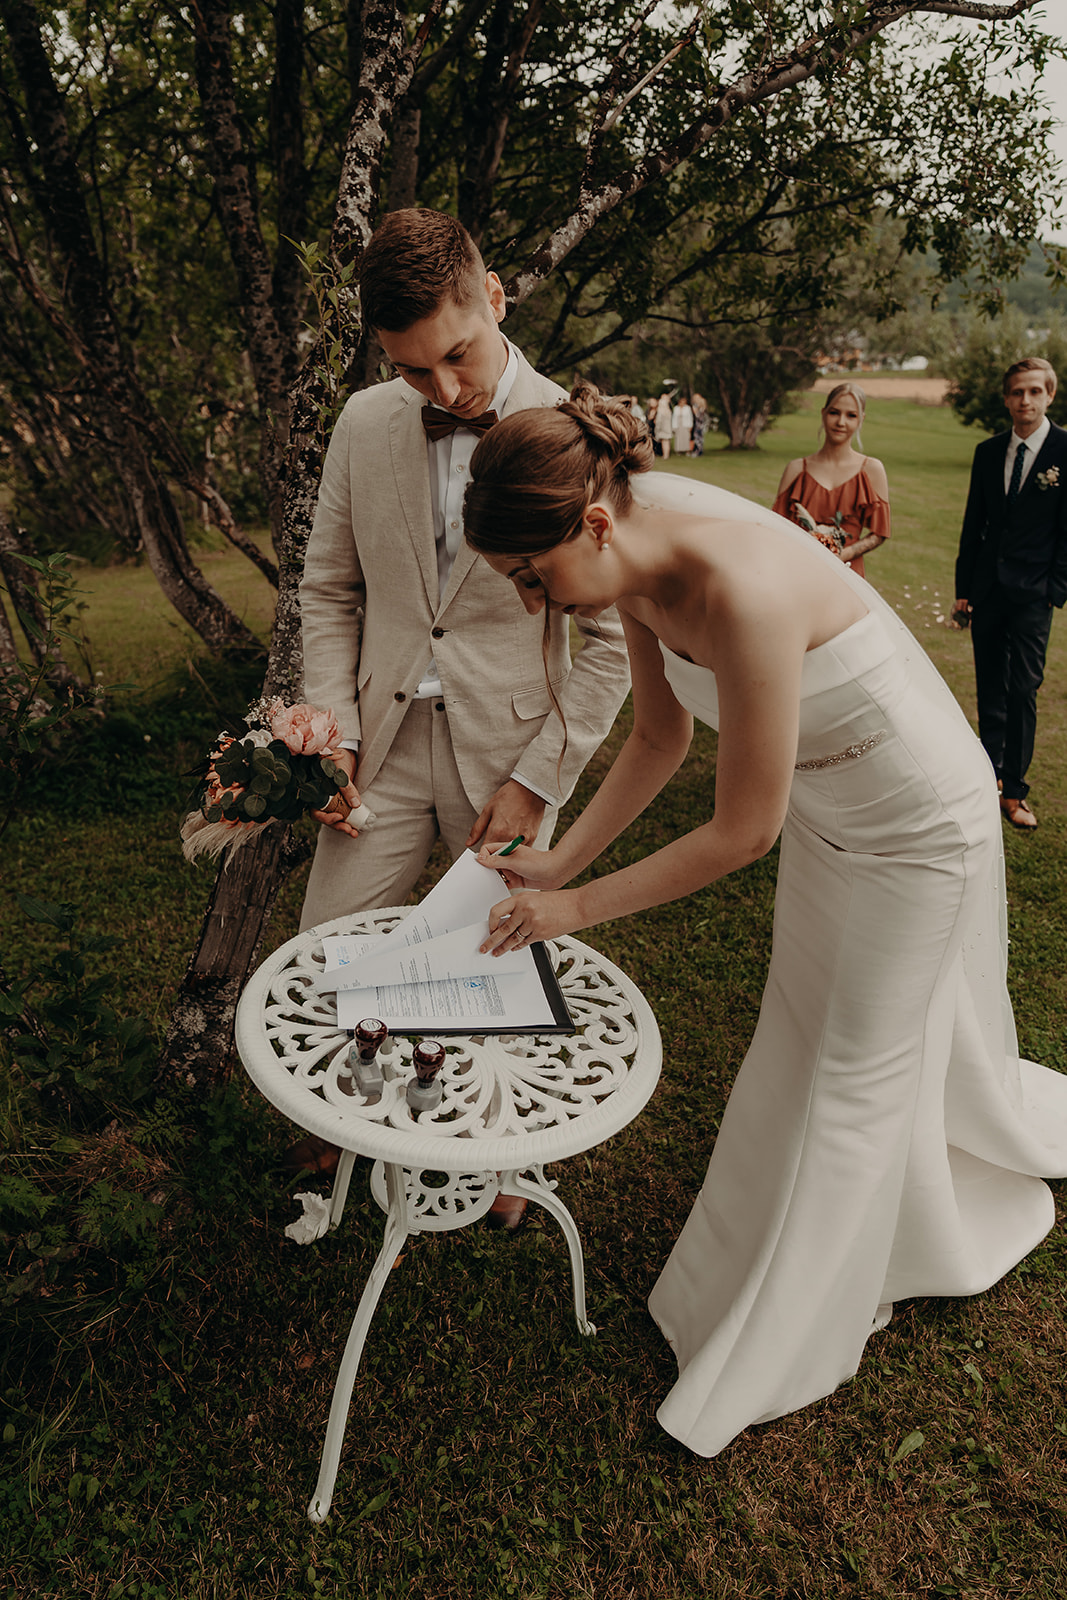 A wedding couple signing their wedding certificate.